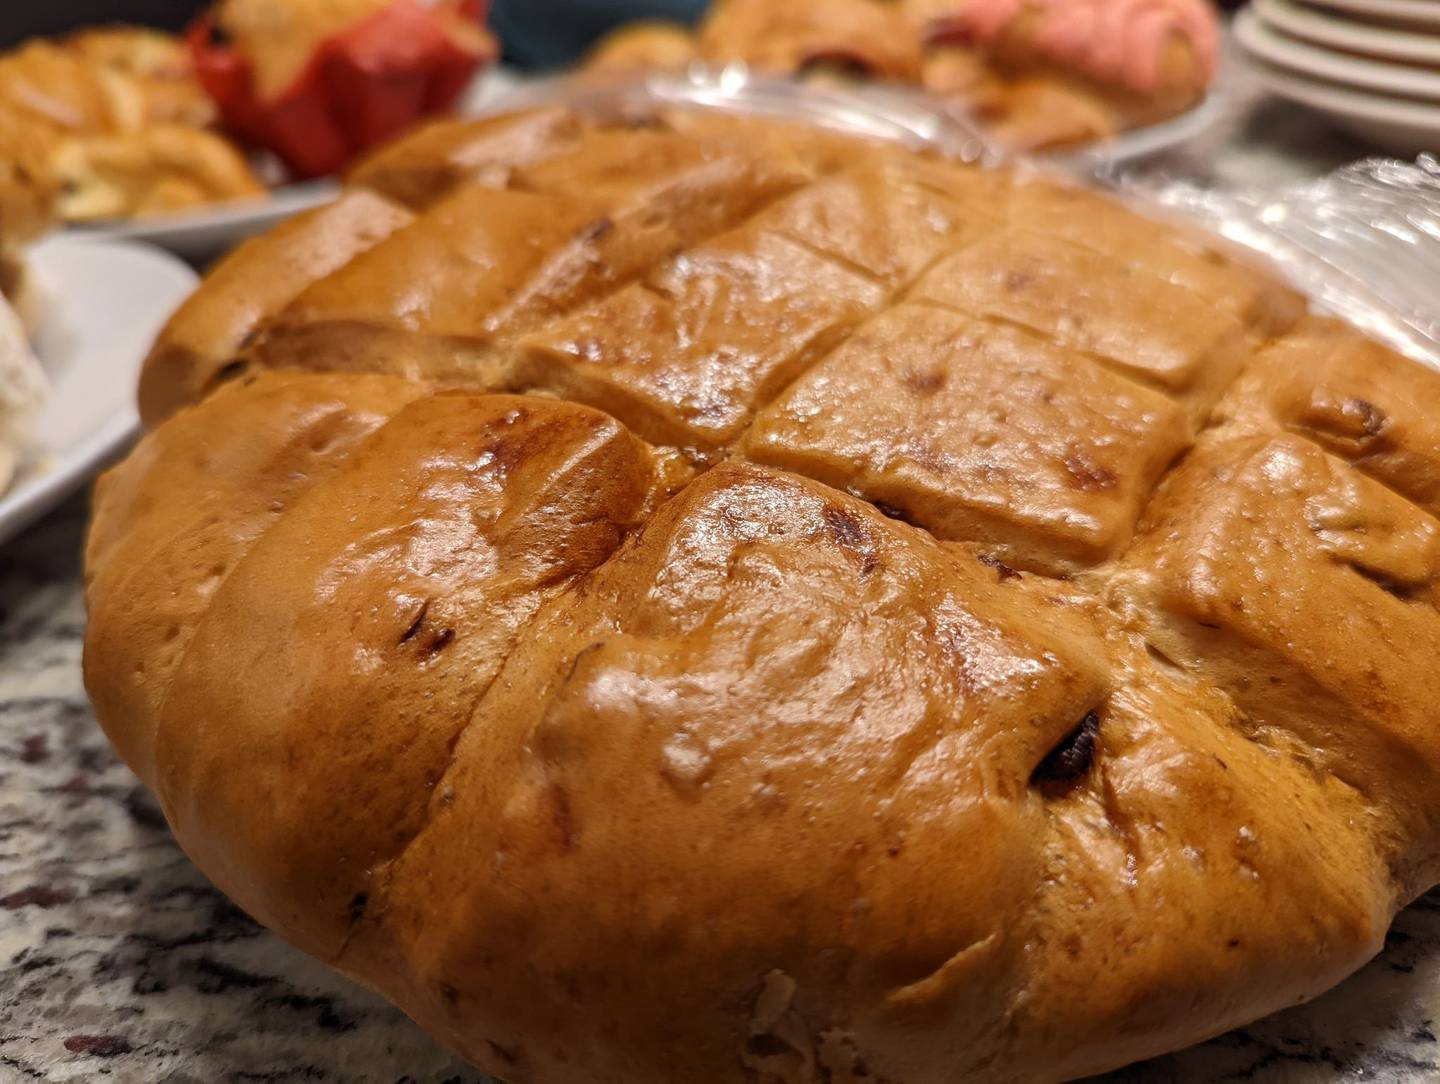 La Chicanita Bakery in Crest Hill offers a wide variety of homemade breads and pastries, juices, sandwiches and custom cakes. Pictured is a loaf of day-old bread.